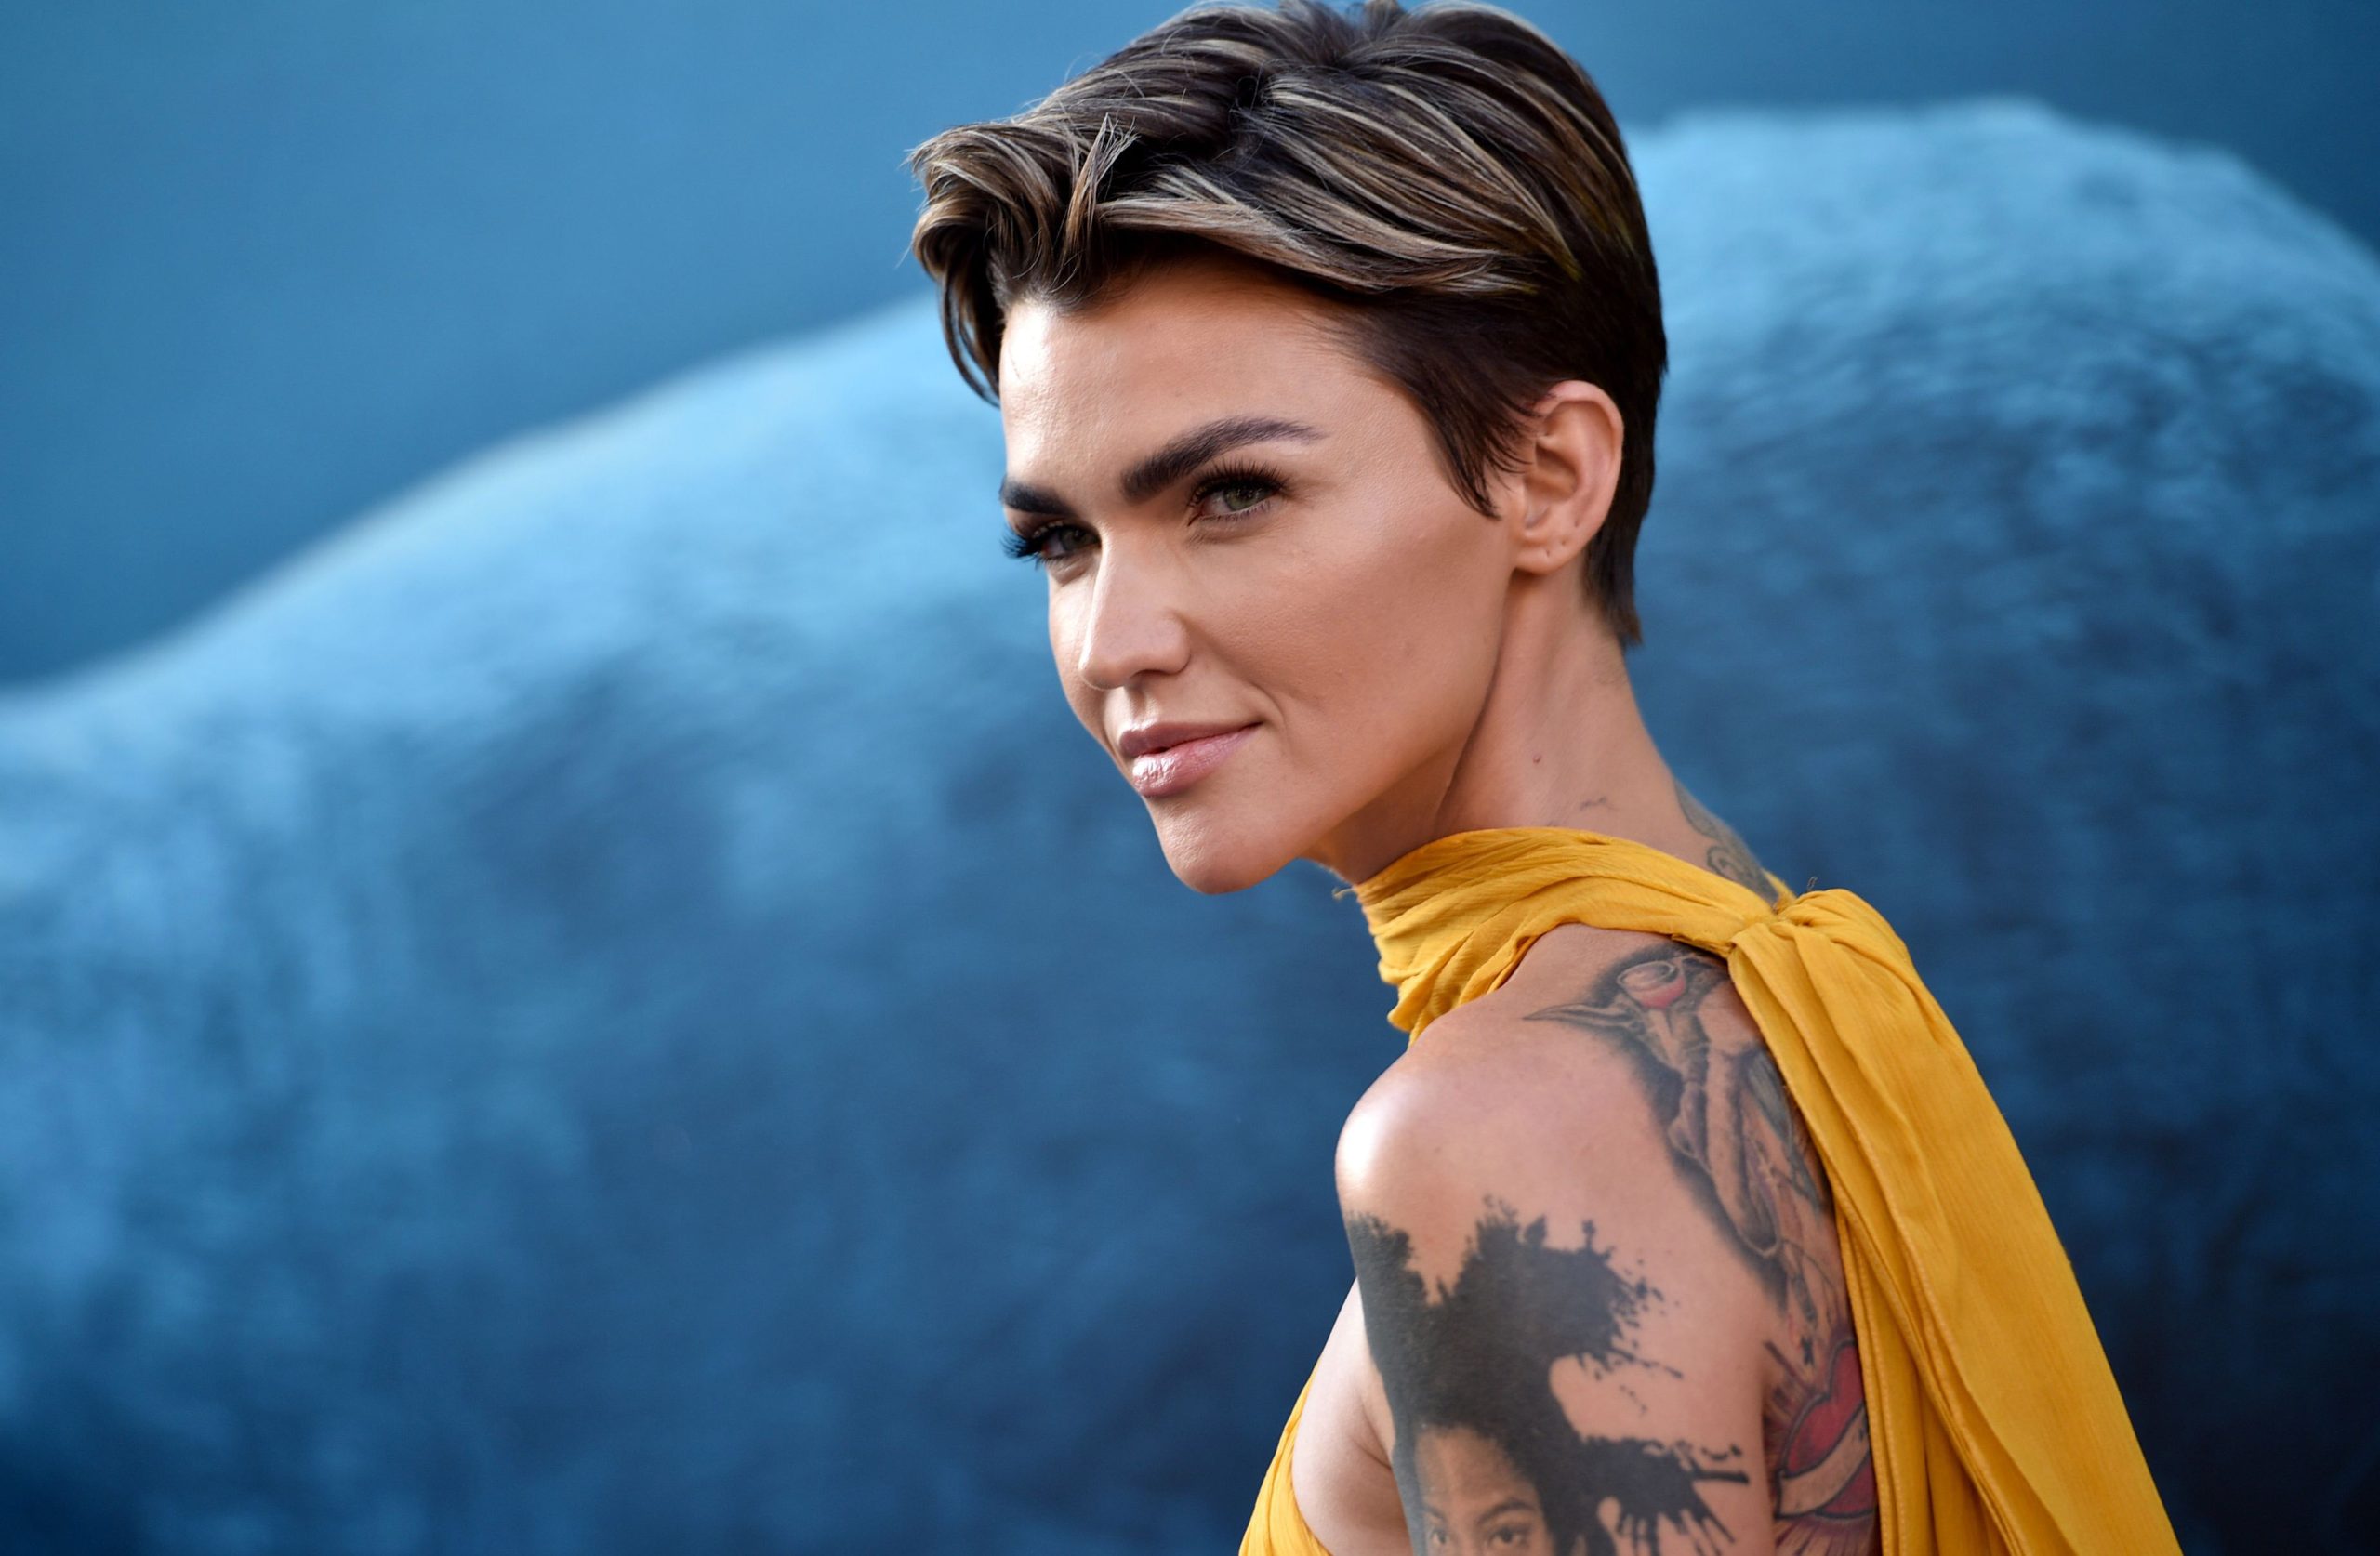 Ruby Rose Wiki, Bio, Age, Net Worth, and Other Facts